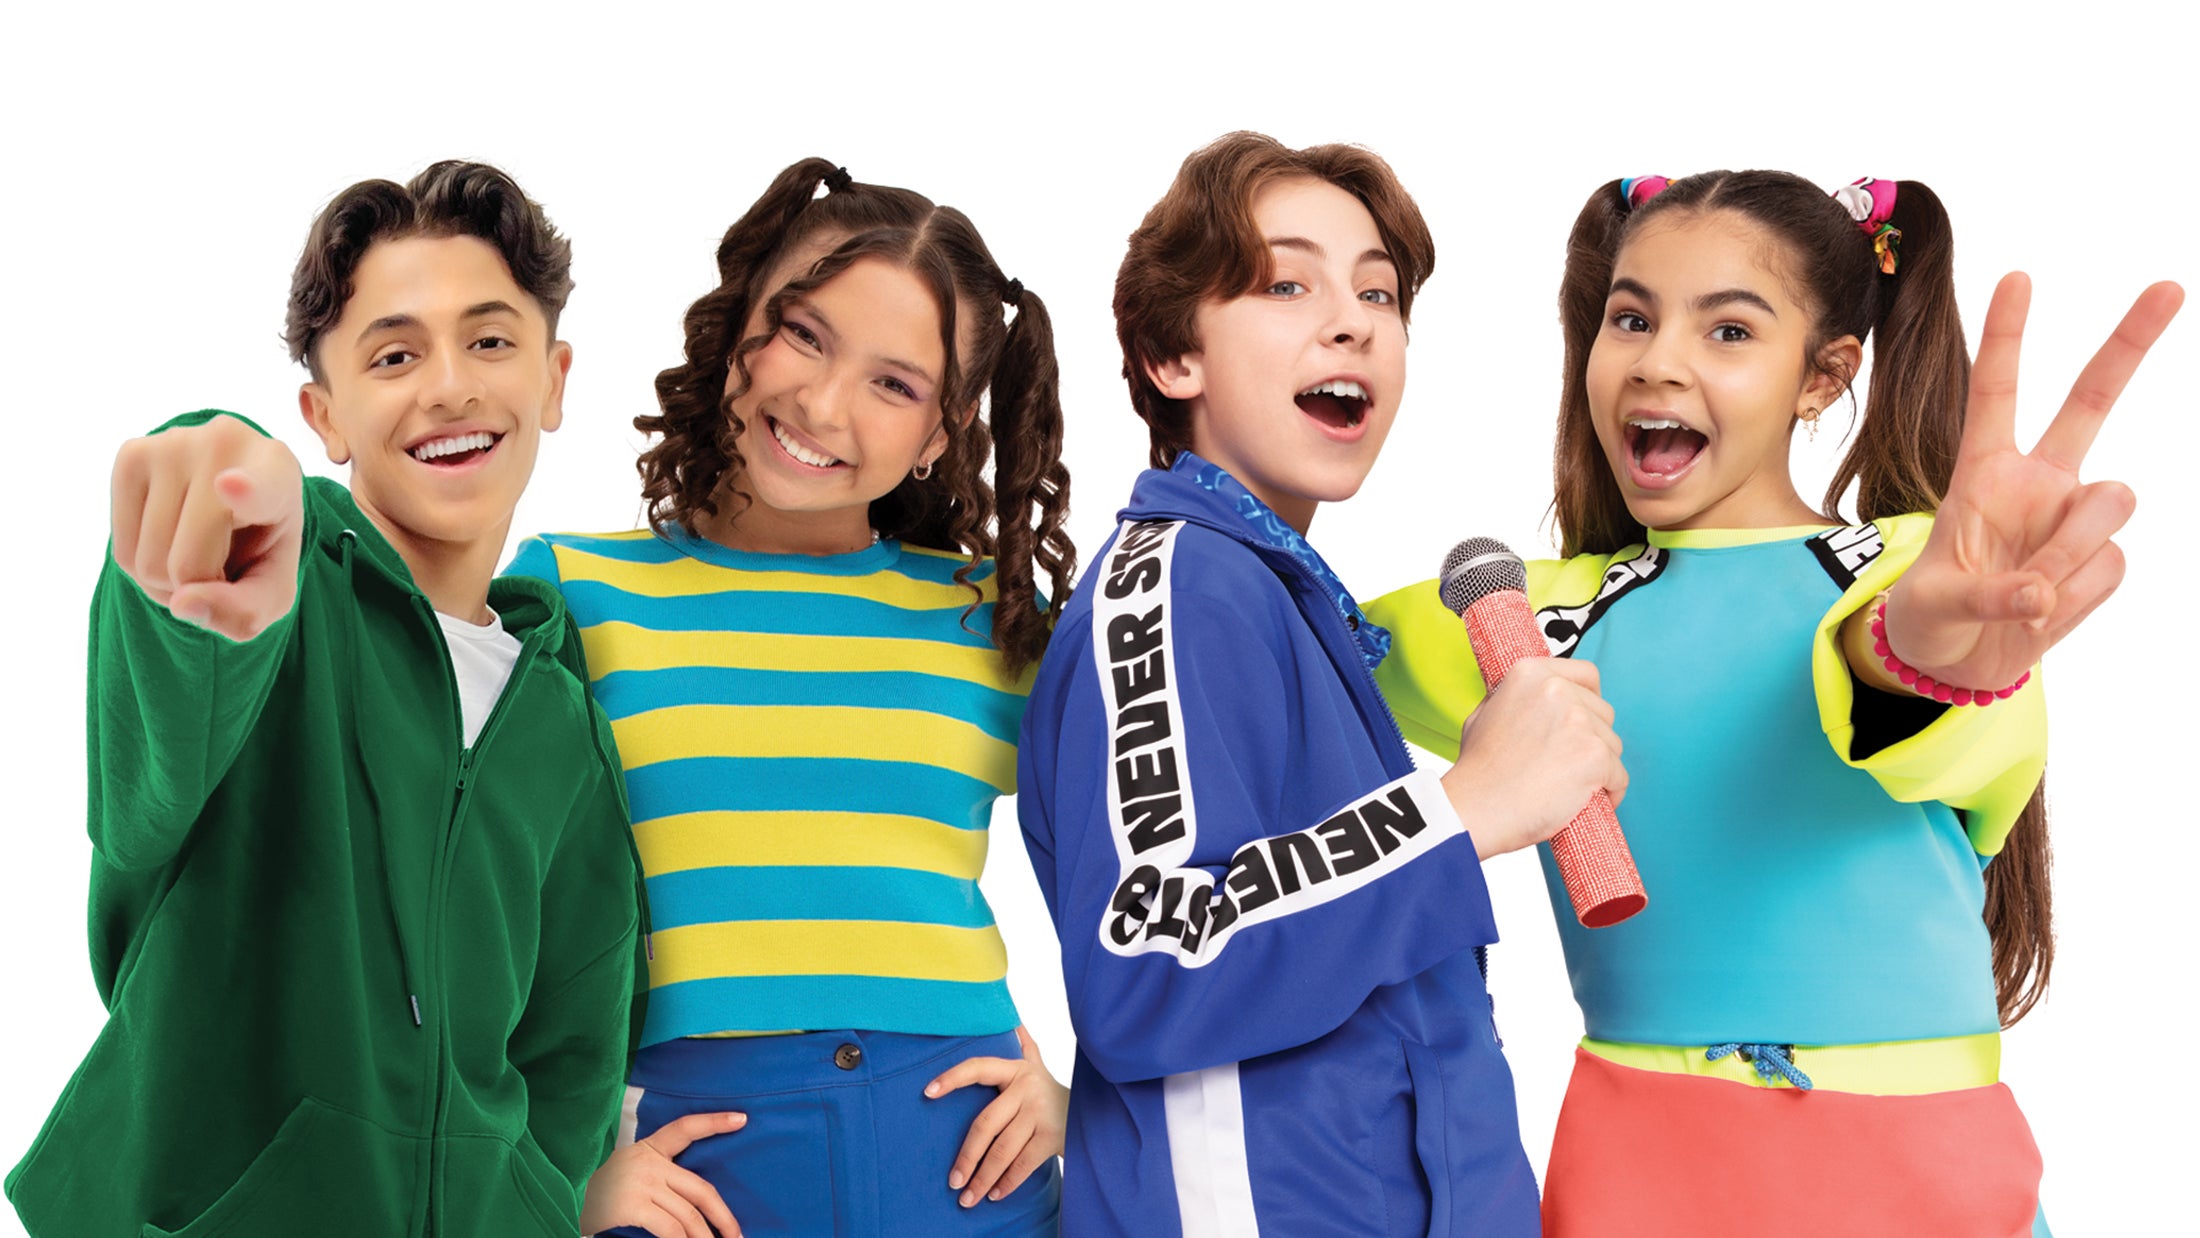 KIDZ BOP Never Stop Live Tour in Bloomington promo photo for VIP Package Onsale presale offer code